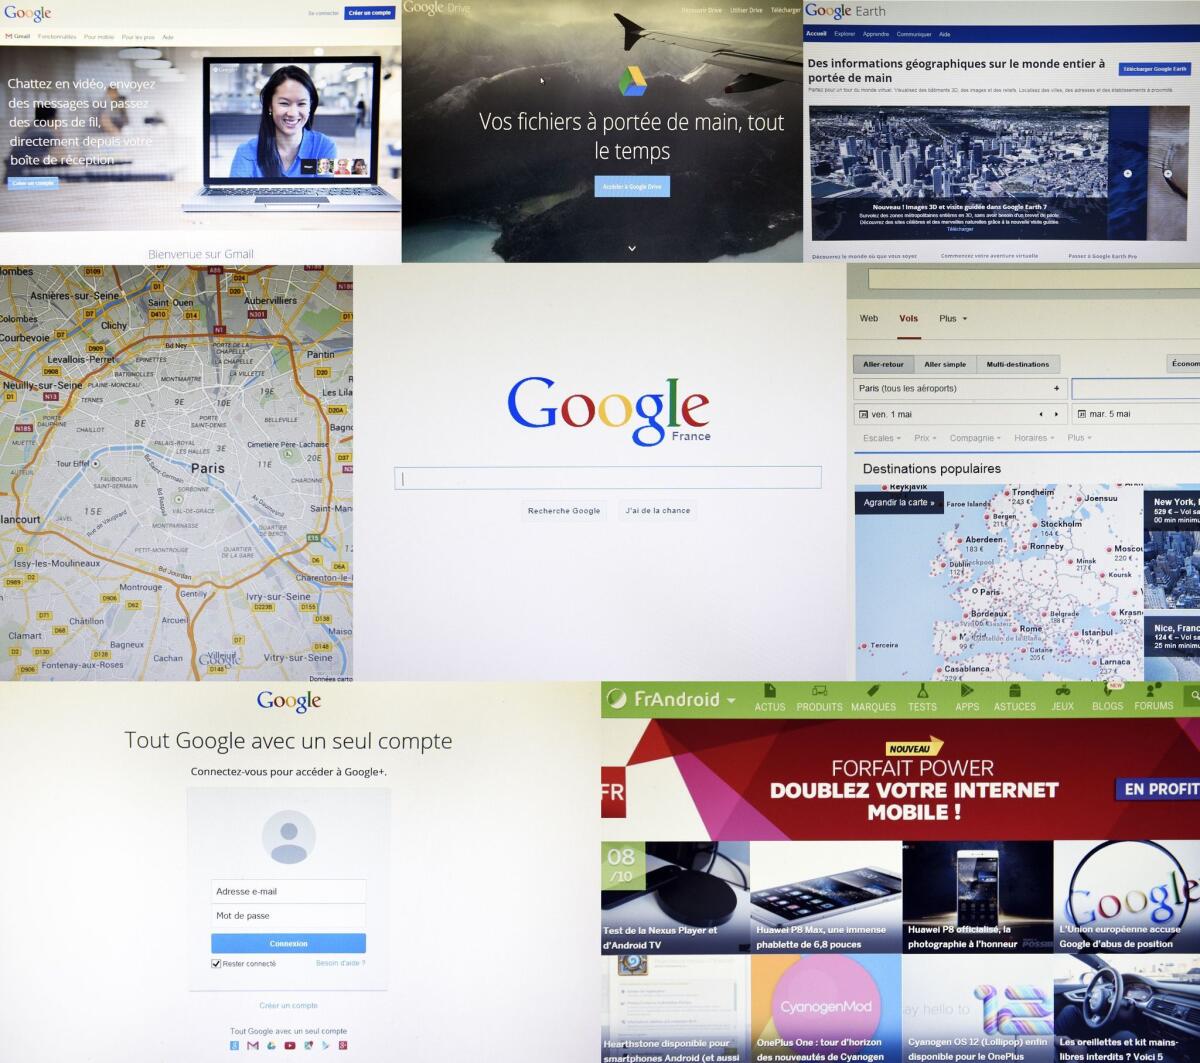 The various front pages of Google websites in France are shown in this image.